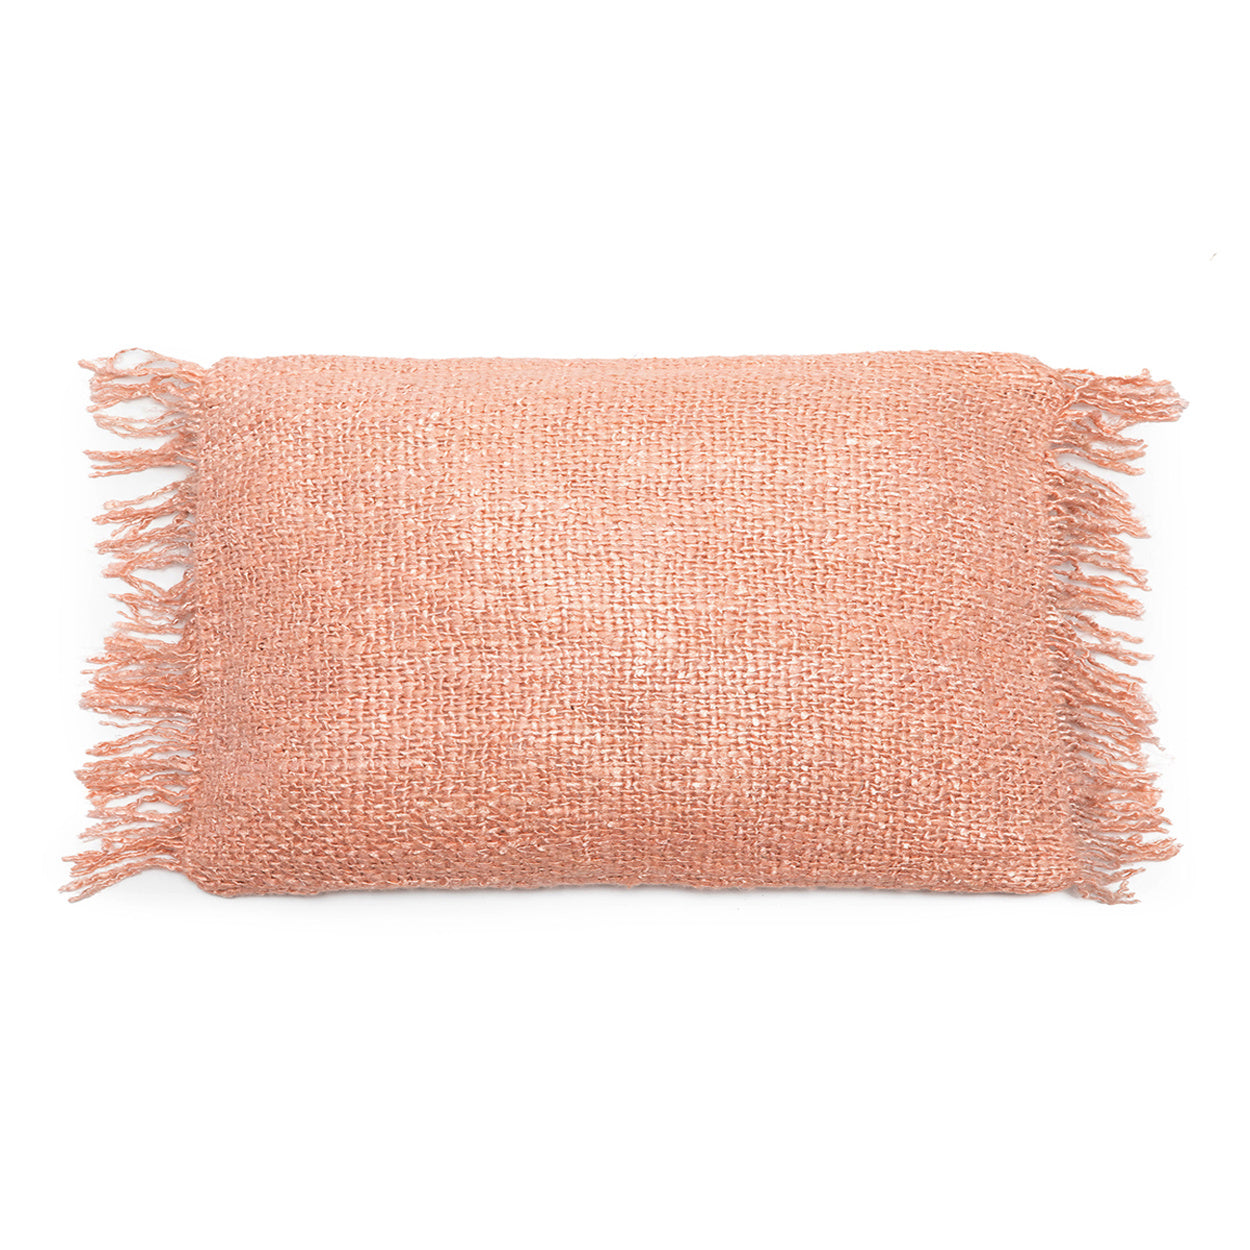 OH MY GEE Cushion Cover Salmon Pink 30x50 cm